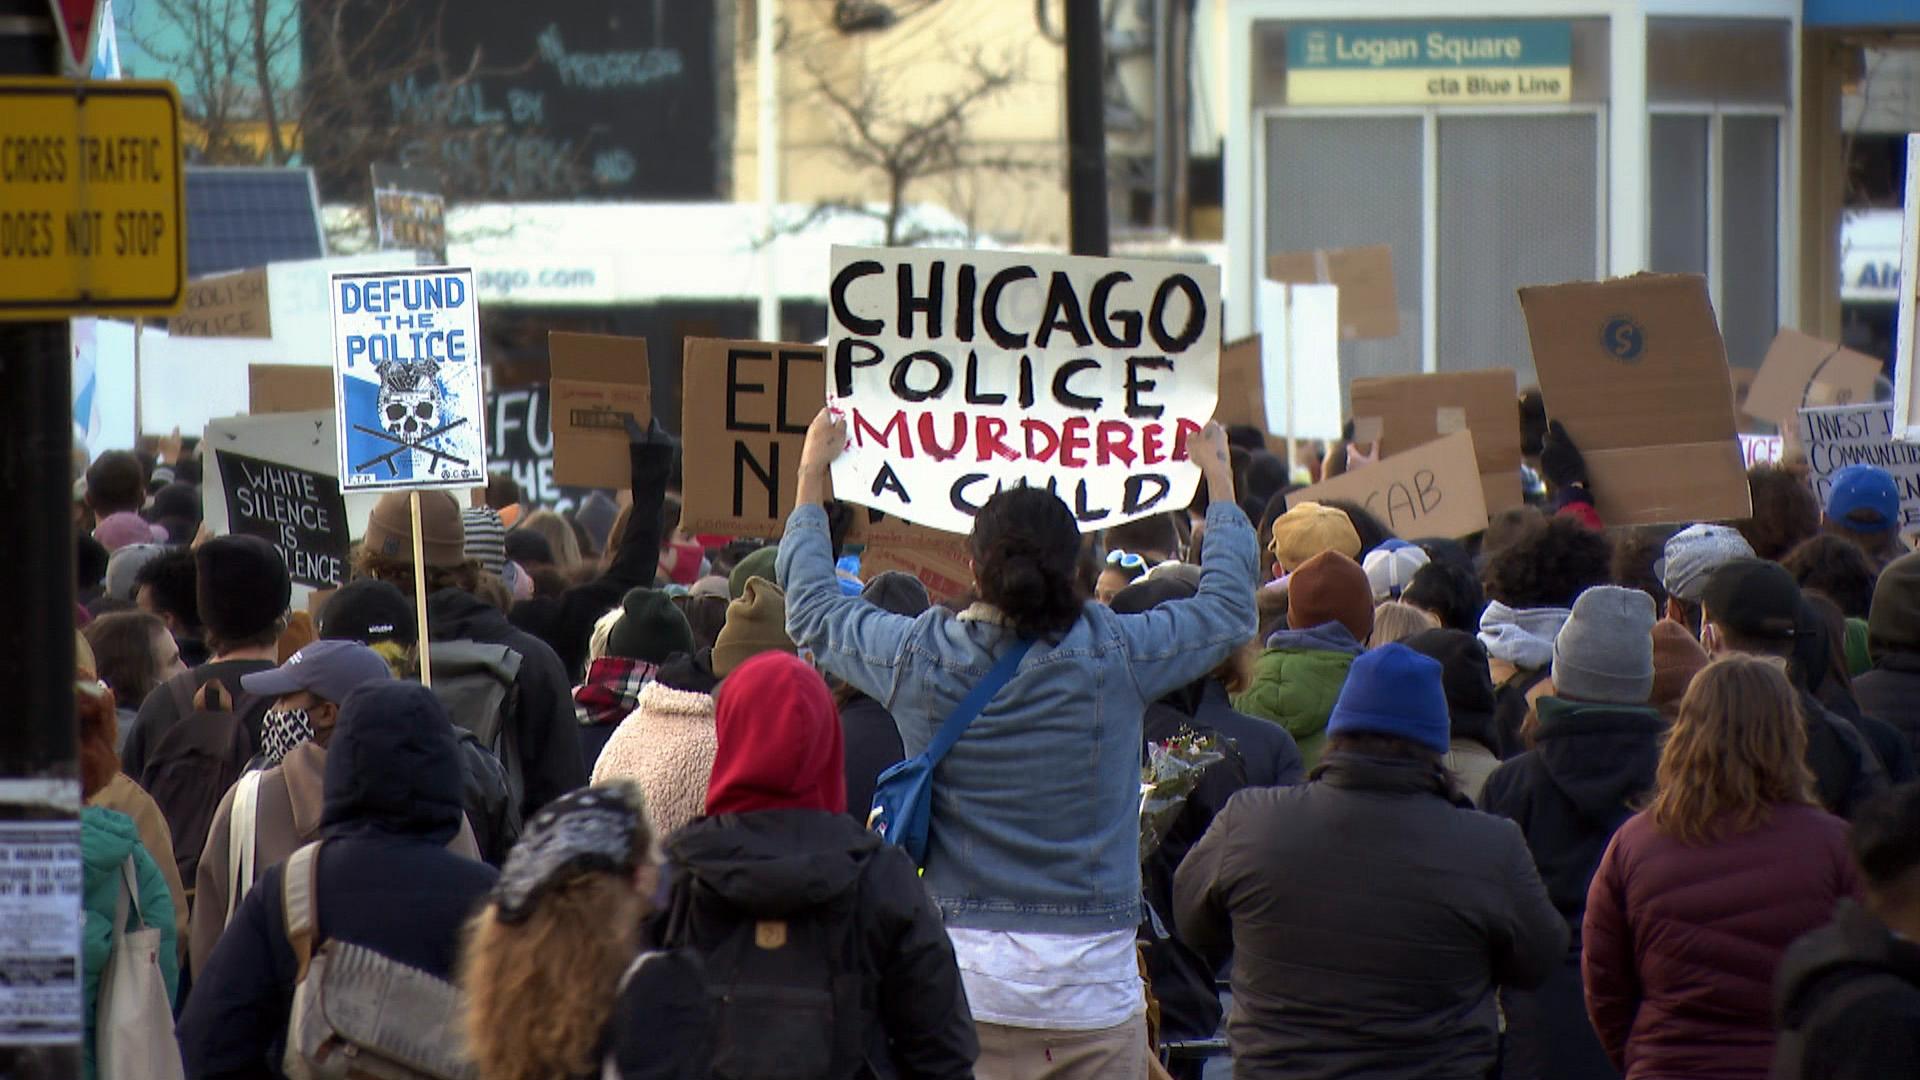 Protesters gather in Logan Square on April 16, 2021 to denounce the police killing of 13-year-old Adam Toledo. (WTTW News)